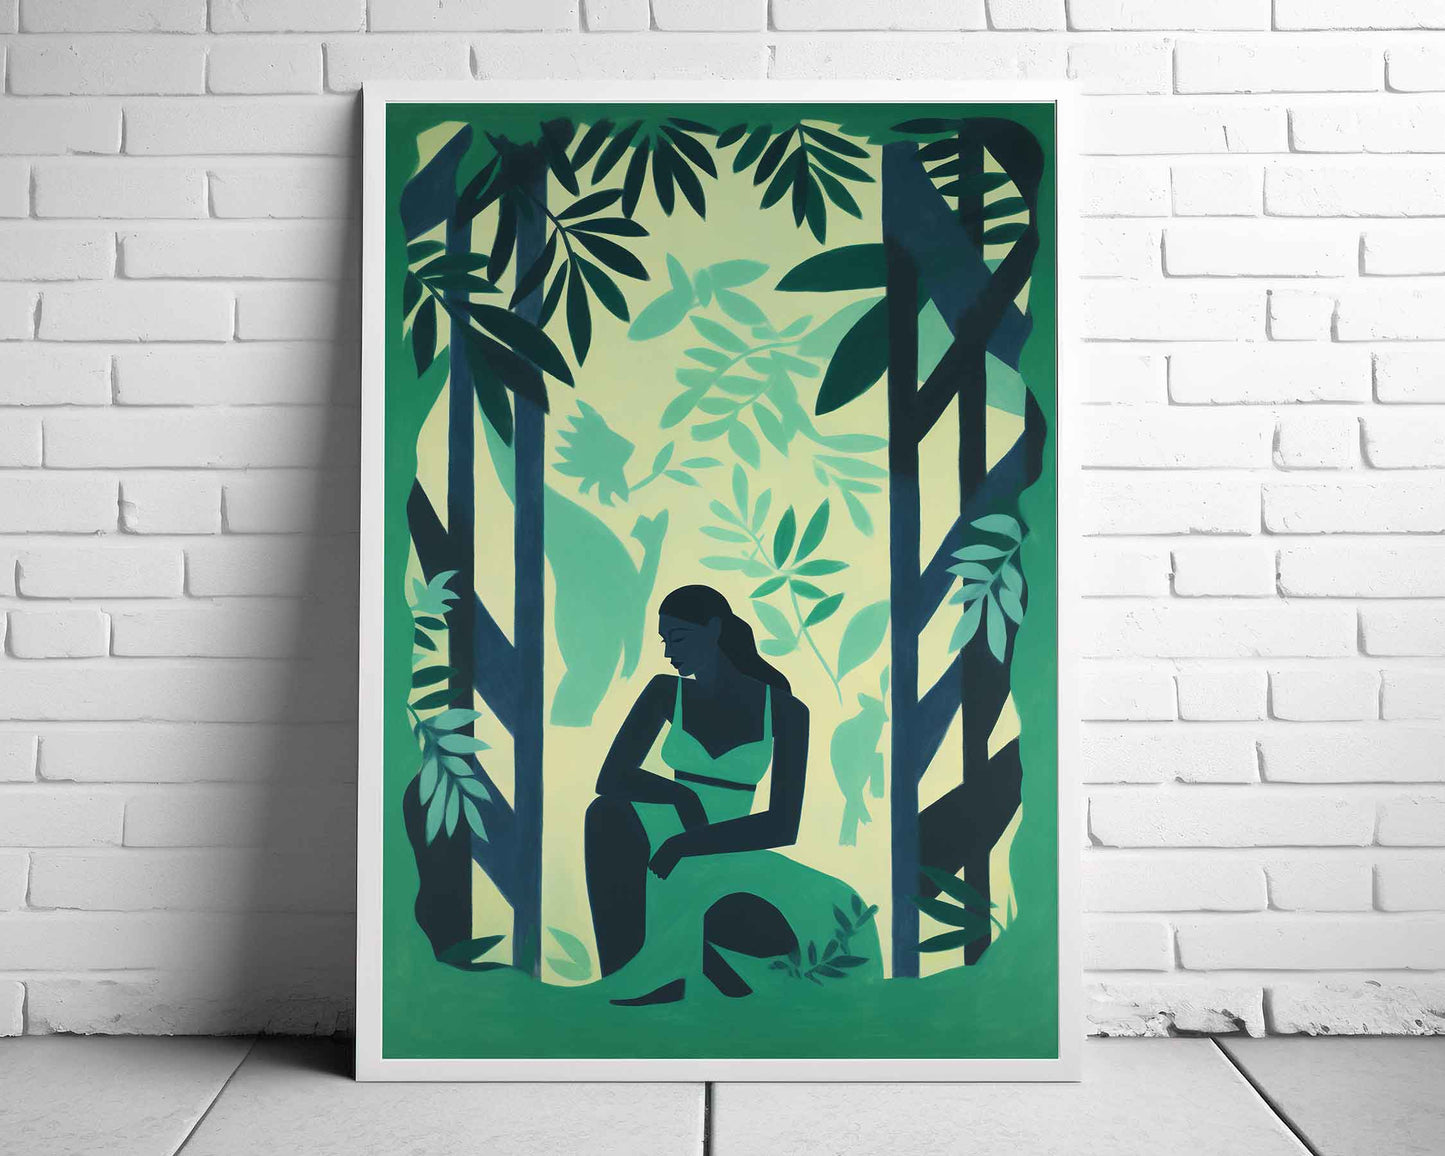 Framed Image of Matisse Style Art Wall Print Green Themed Poster Oil Paintings